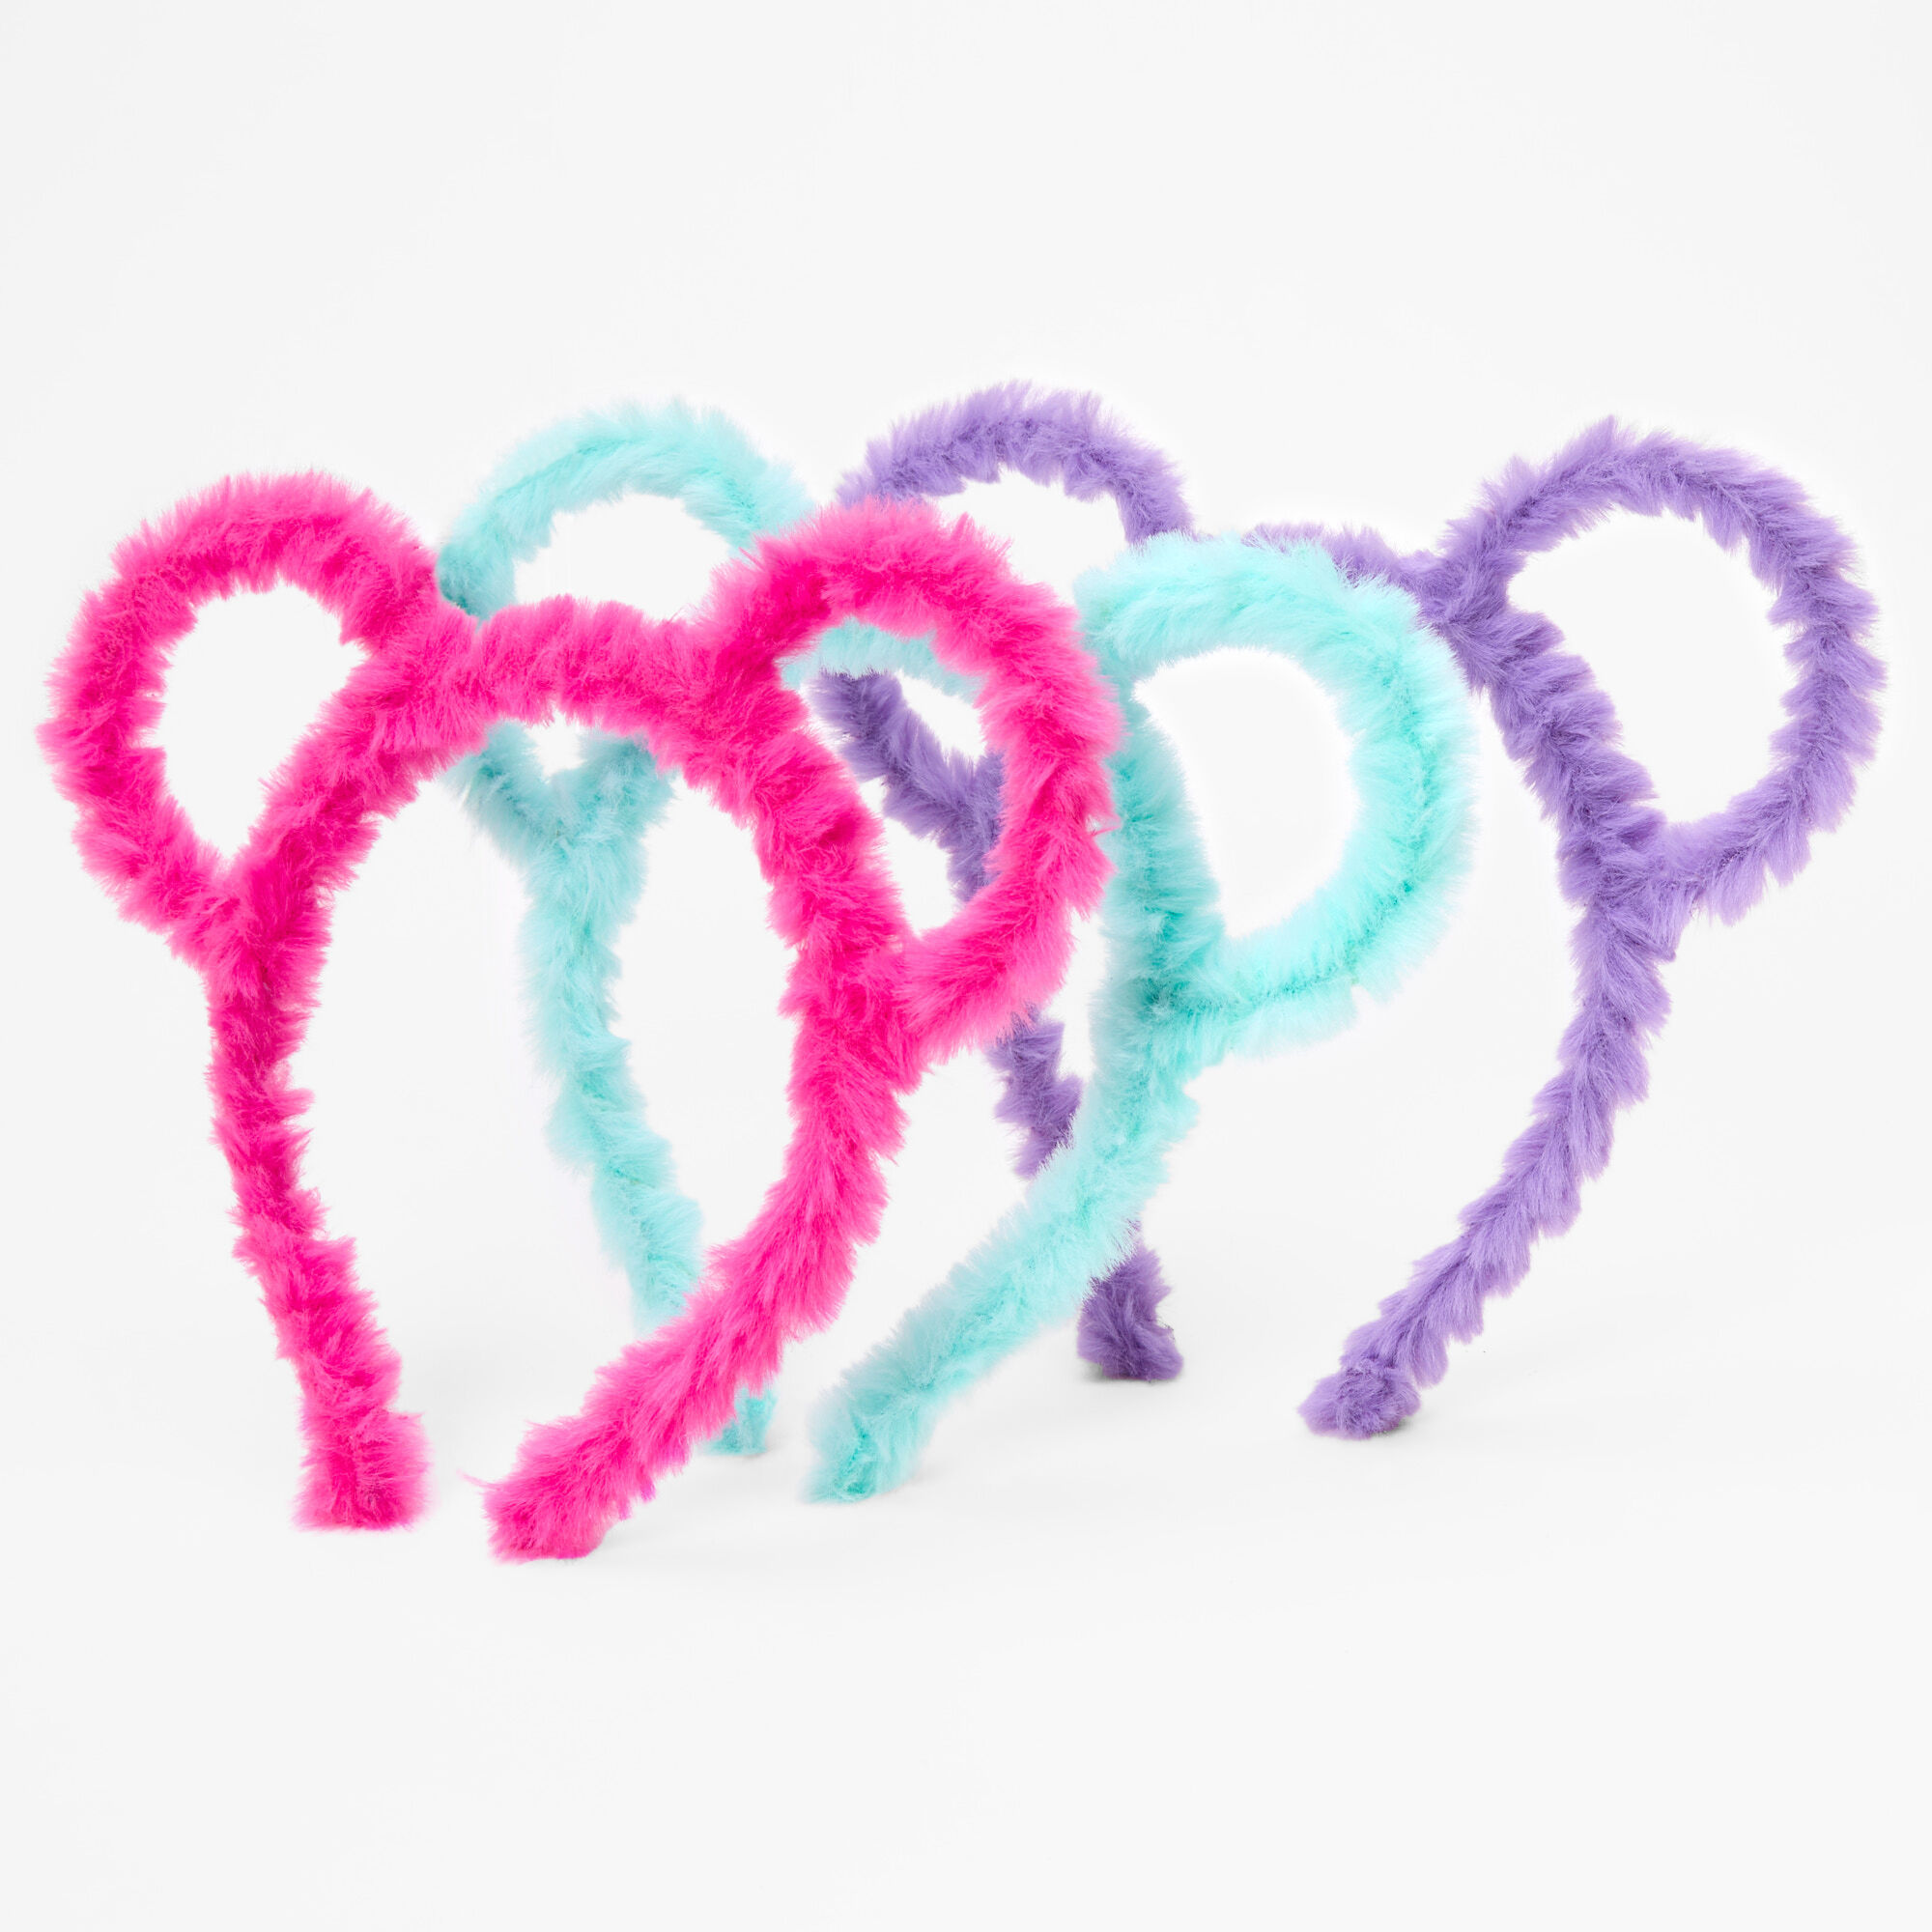 View Claires Club Furry Animal Ears Headbands 3 Pack information